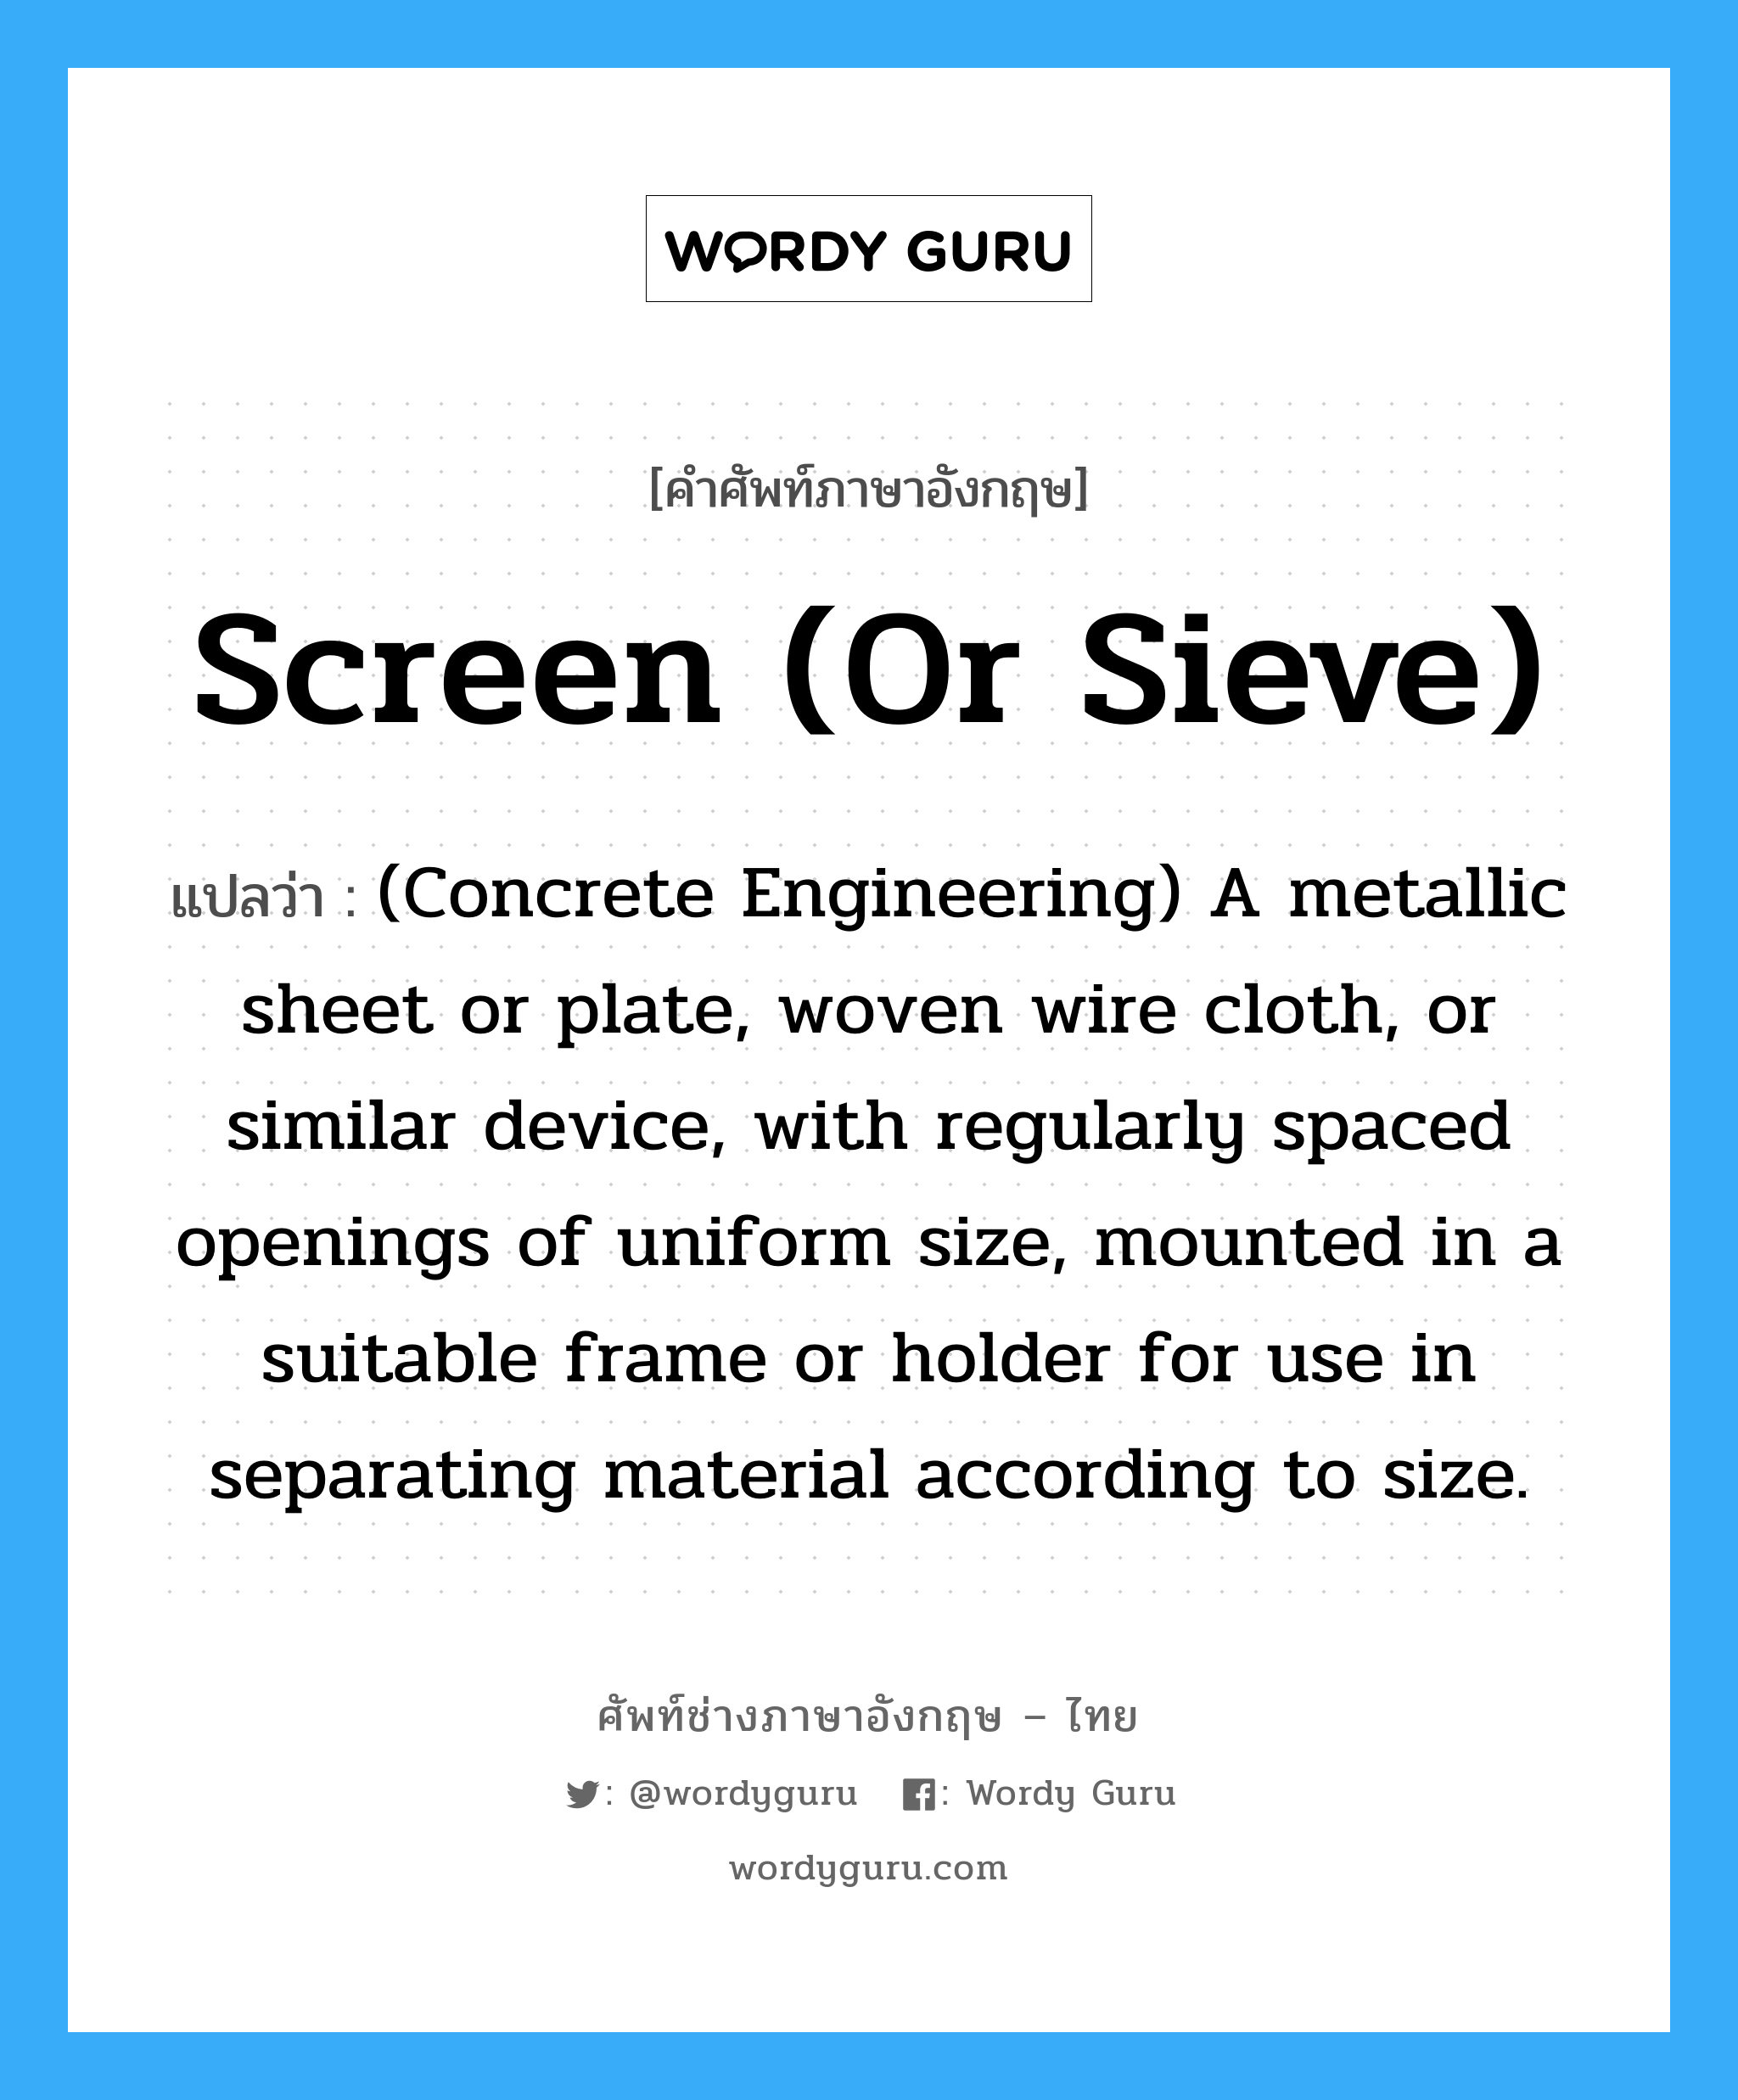 (Concrete Engineering) A metallic sheet or plate, woven wire cloth, or similar device, with regularly spaced openings of uniform size, mounted in a suitable frame or holder for use in separating material according to size. ภาษาอังกฤษ?, คำศัพท์ช่างภาษาอังกฤษ - ไทย (Concrete Engineering) A metallic sheet or plate, woven wire cloth, or similar device, with regularly spaced openings of uniform size, mounted in a suitable frame or holder for use in separating material according to size. คำศัพท์ภาษาอังกฤษ (Concrete Engineering) A metallic sheet or plate, woven wire cloth, or similar device, with regularly spaced openings of uniform size, mounted in a suitable frame or holder for use in separating material according to size. แปลว่า Screen (or Sieve)